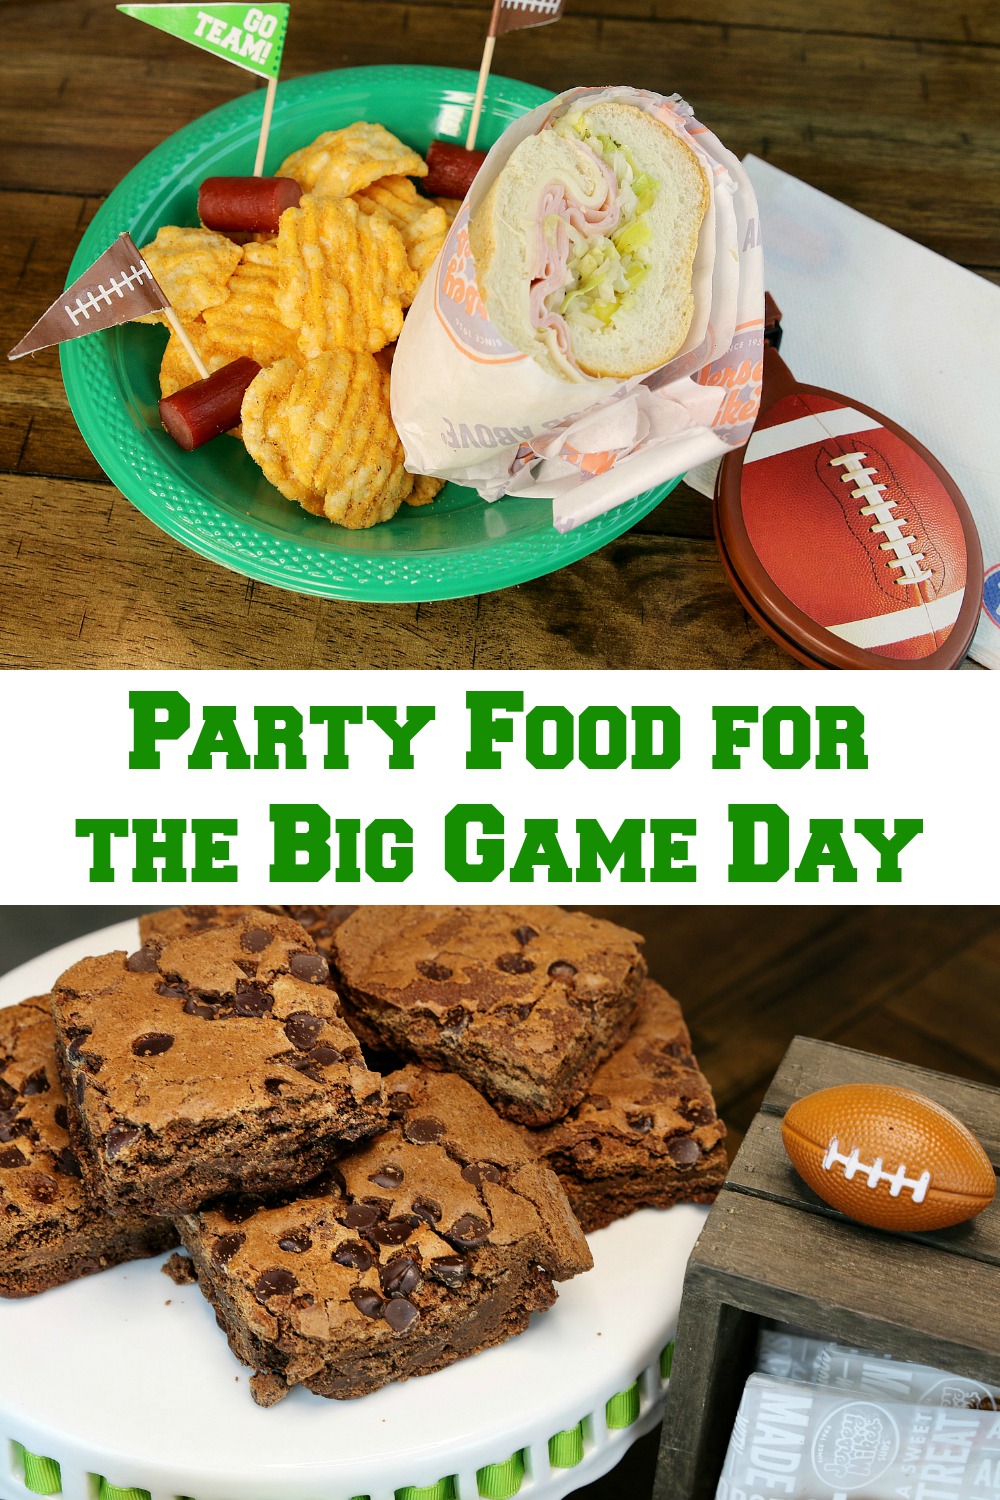 Party Food for the Big Game Day